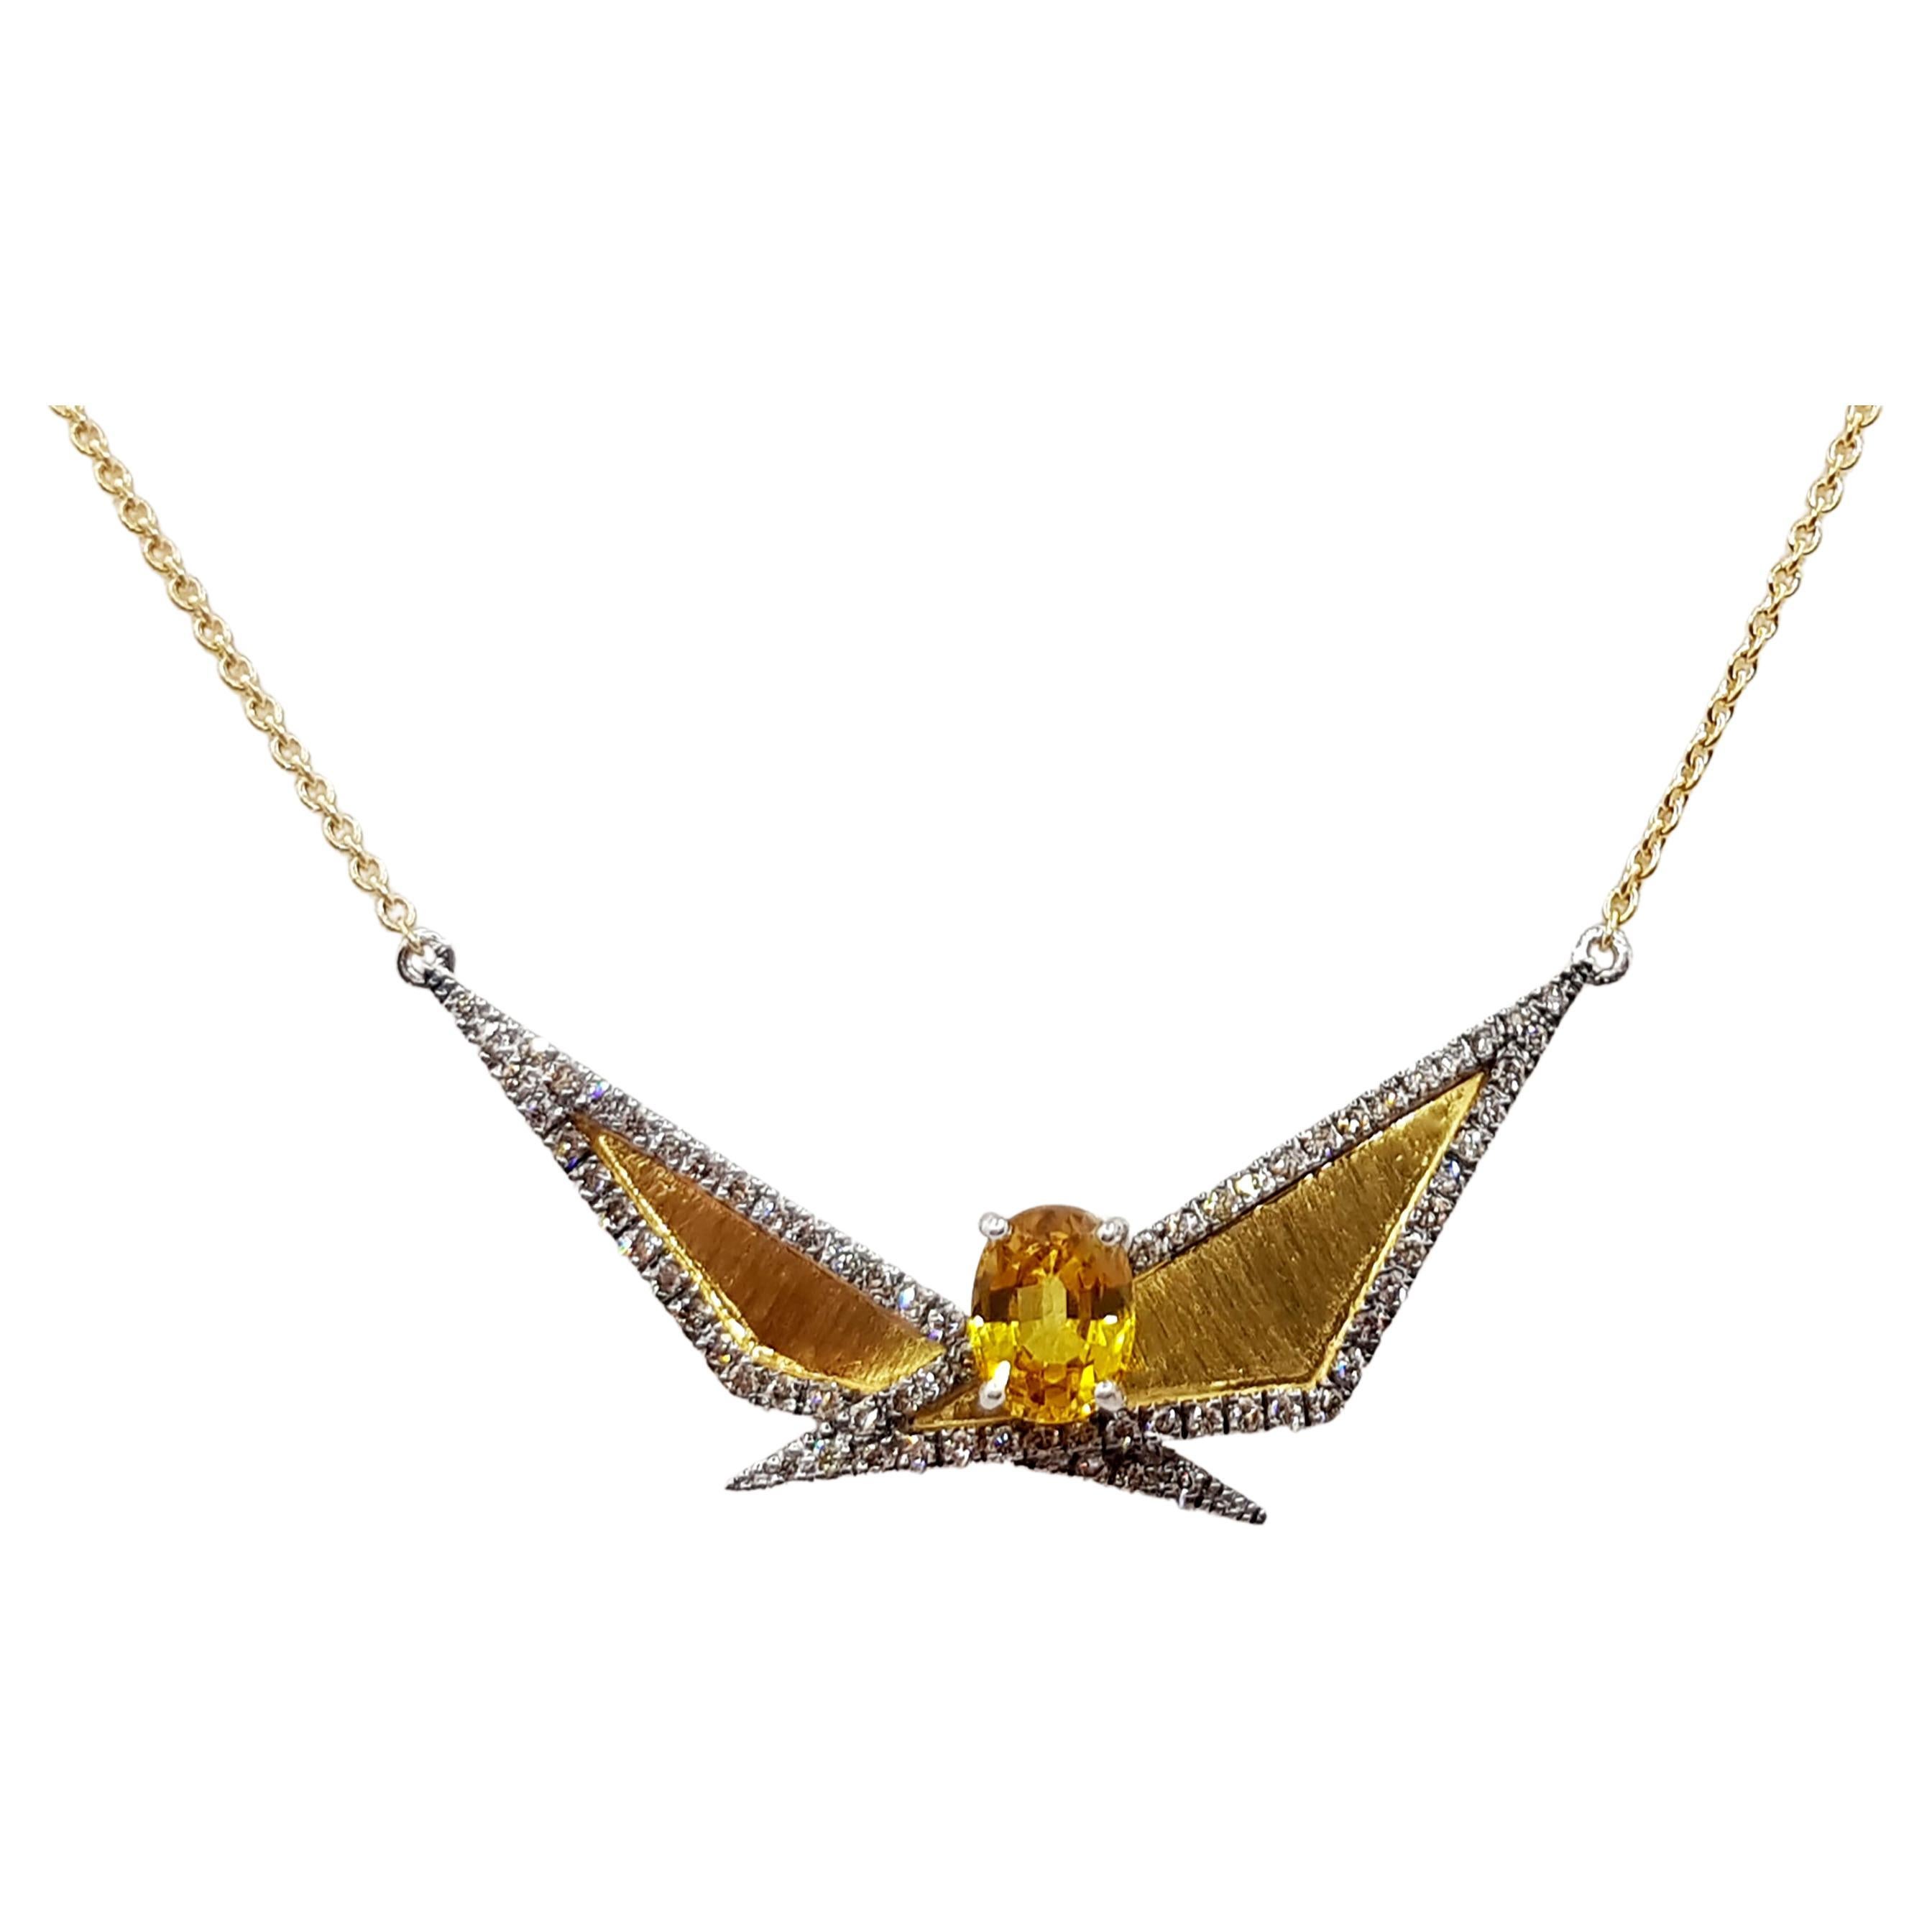 Yellow Sapphire 1.84 carats with Brown Diamond 0.61 carat Necklace set in 18 Karat Gold Settings by Kavant & Sharart

Width:  2.5 cm 
Length:  49.0 cm
Total Weight: 10.83 grams

